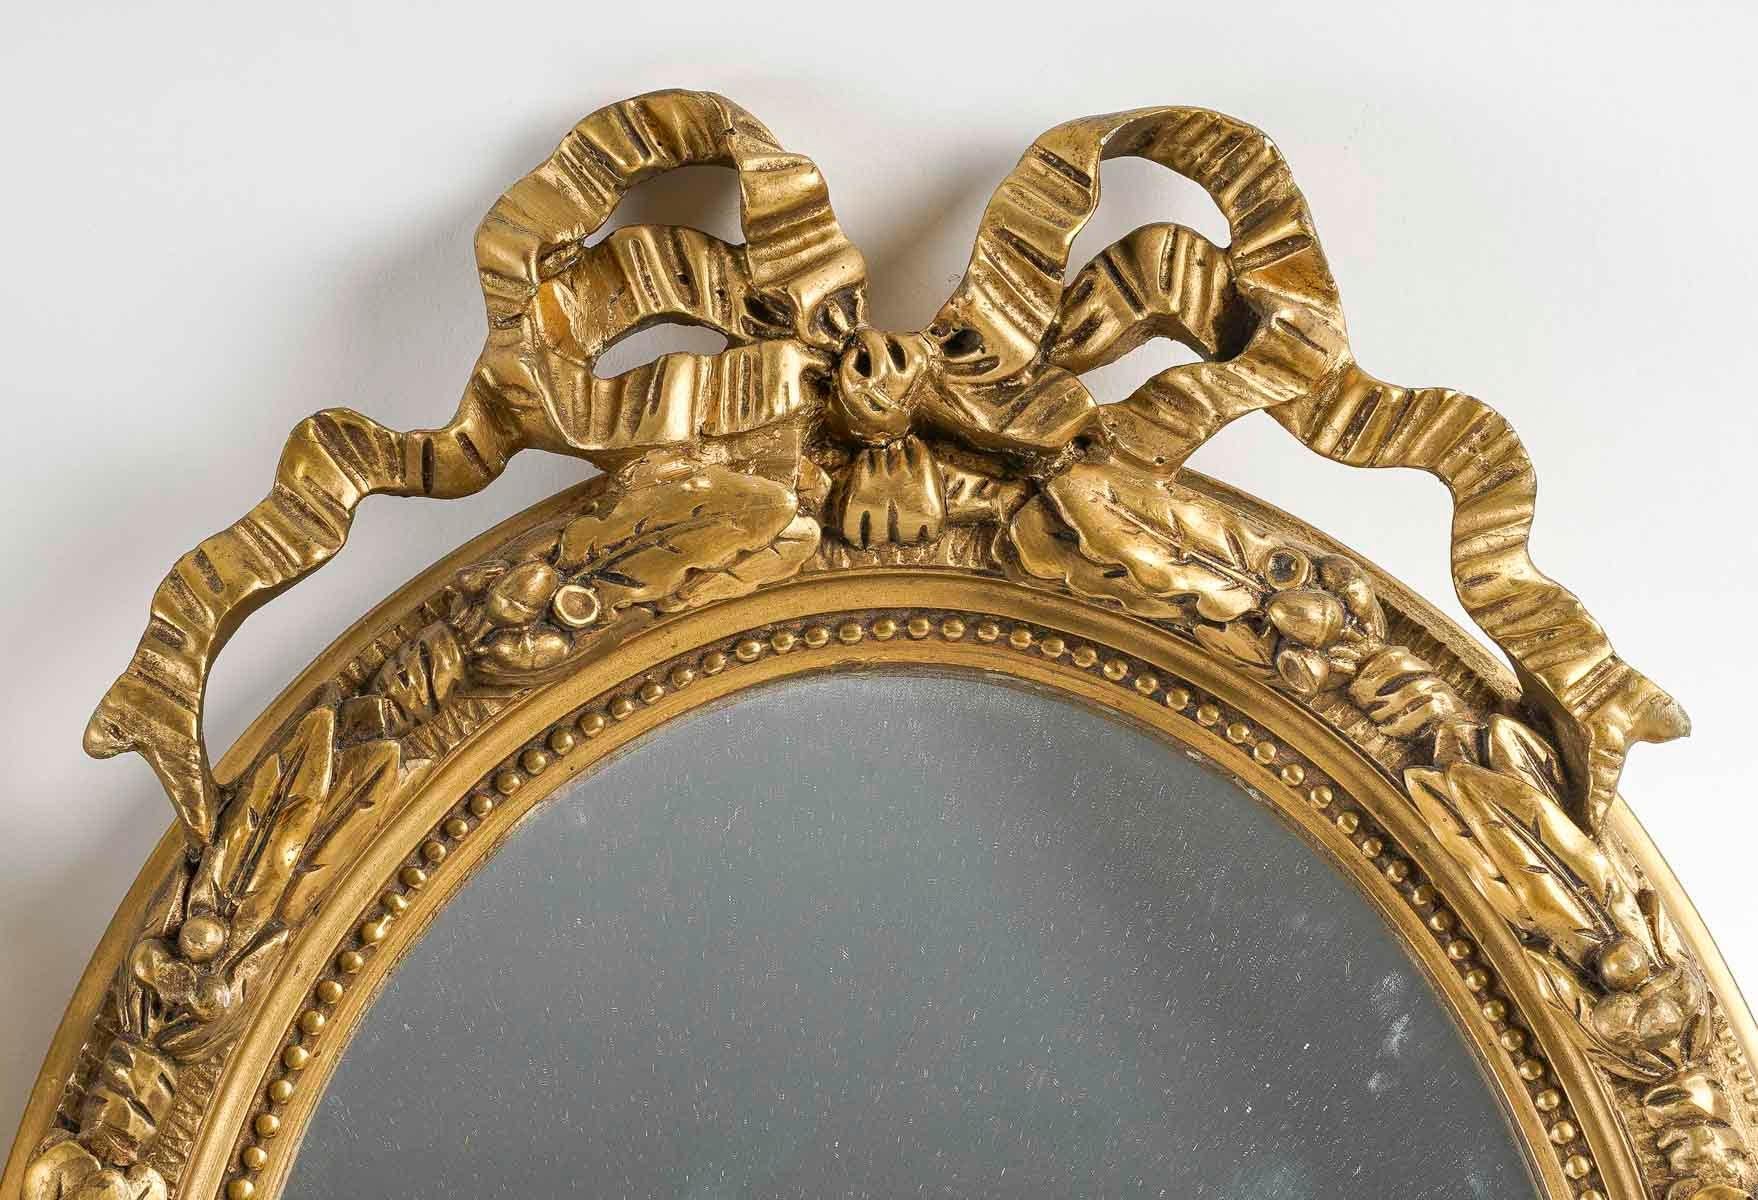 Pair of Louis XVI Style Wood and Gilded Stucco Mirrors, Early 20th Century.

Pair of wooden and gilded stucco mirrors, early 20th century, Louis XVI style.
h:55cm, w: 37cm, d: 5,5cm